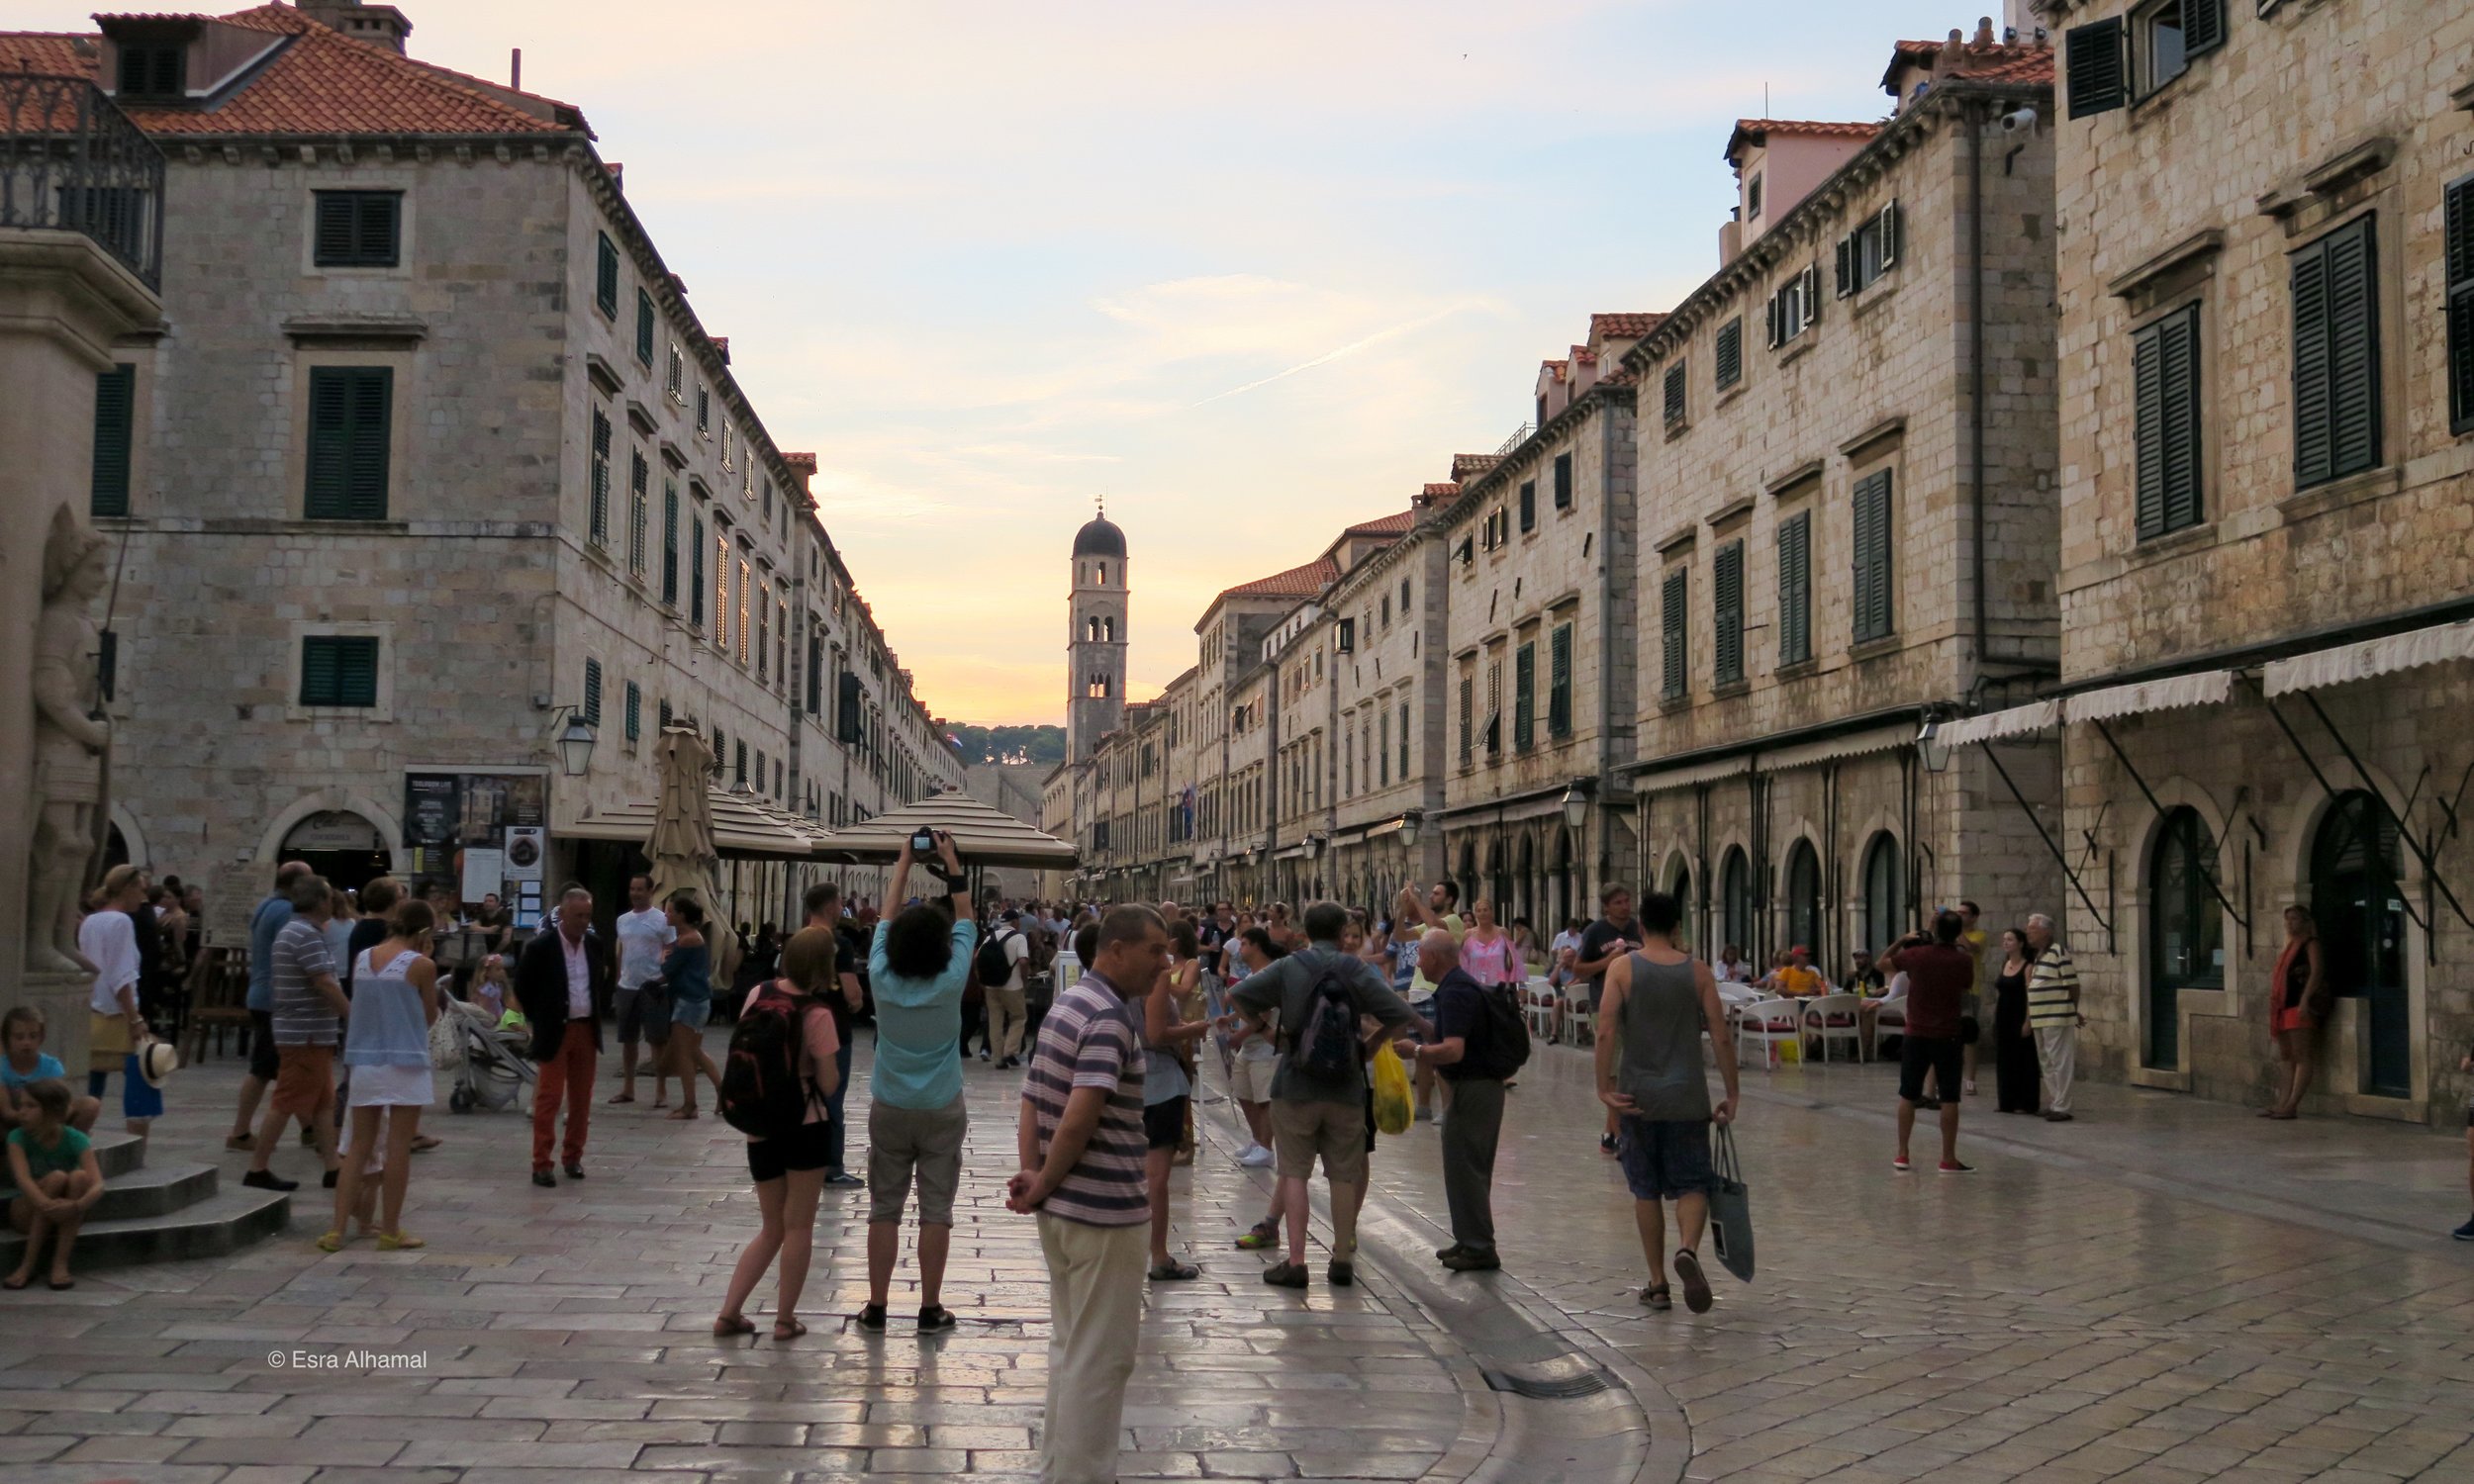 Dubrovnik was heaving with tourists